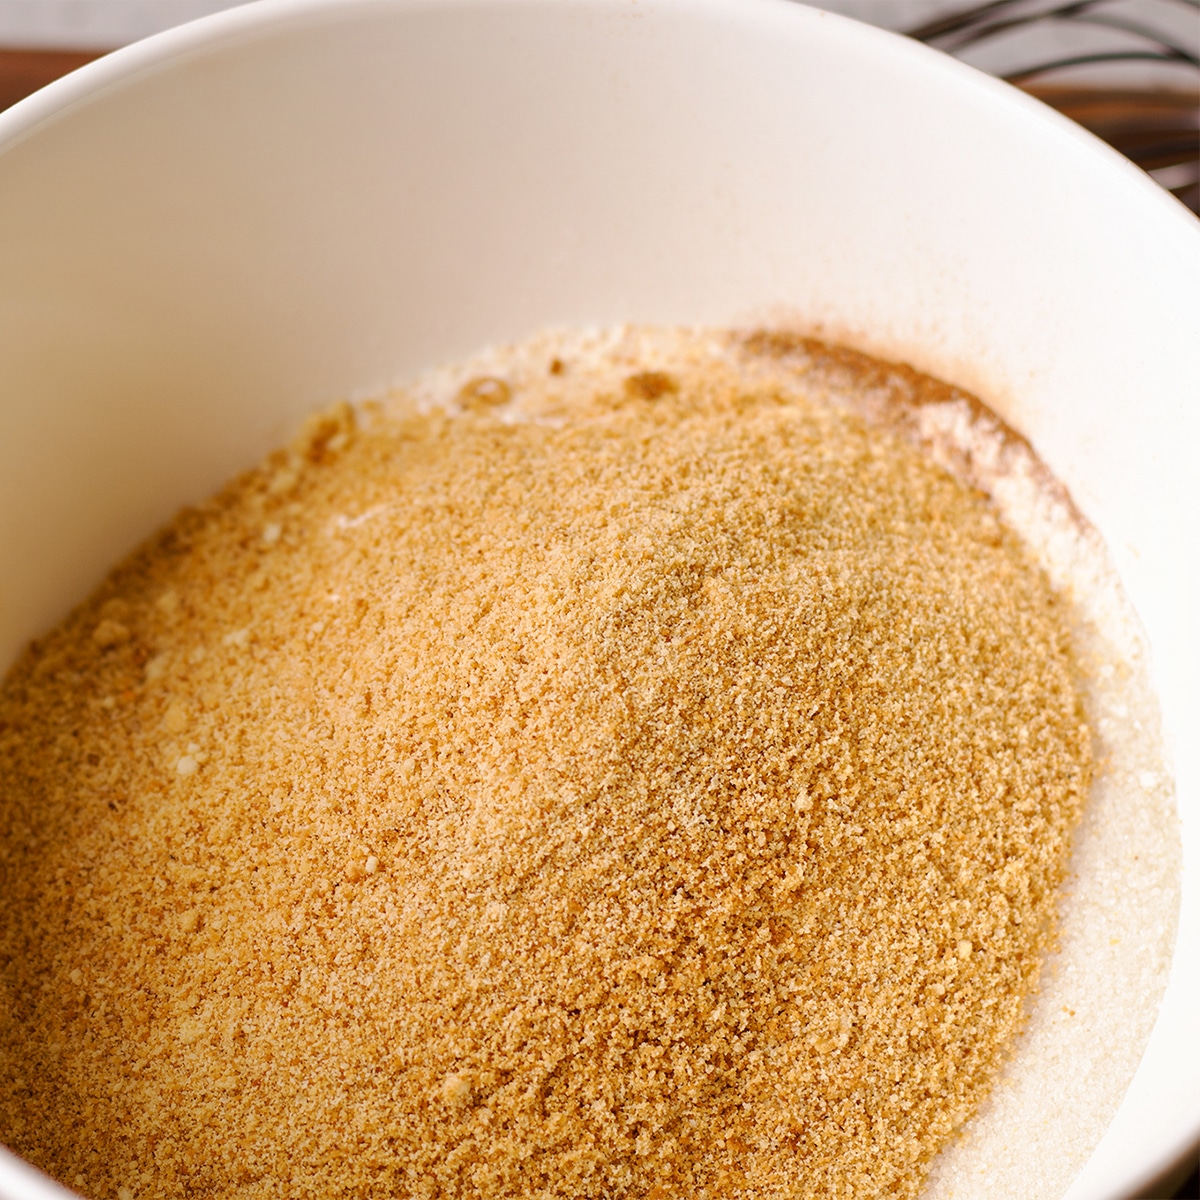 A white mixing bowl containing toasted almond flour, all-purpose flour, cinnamon, sugar, and salt.